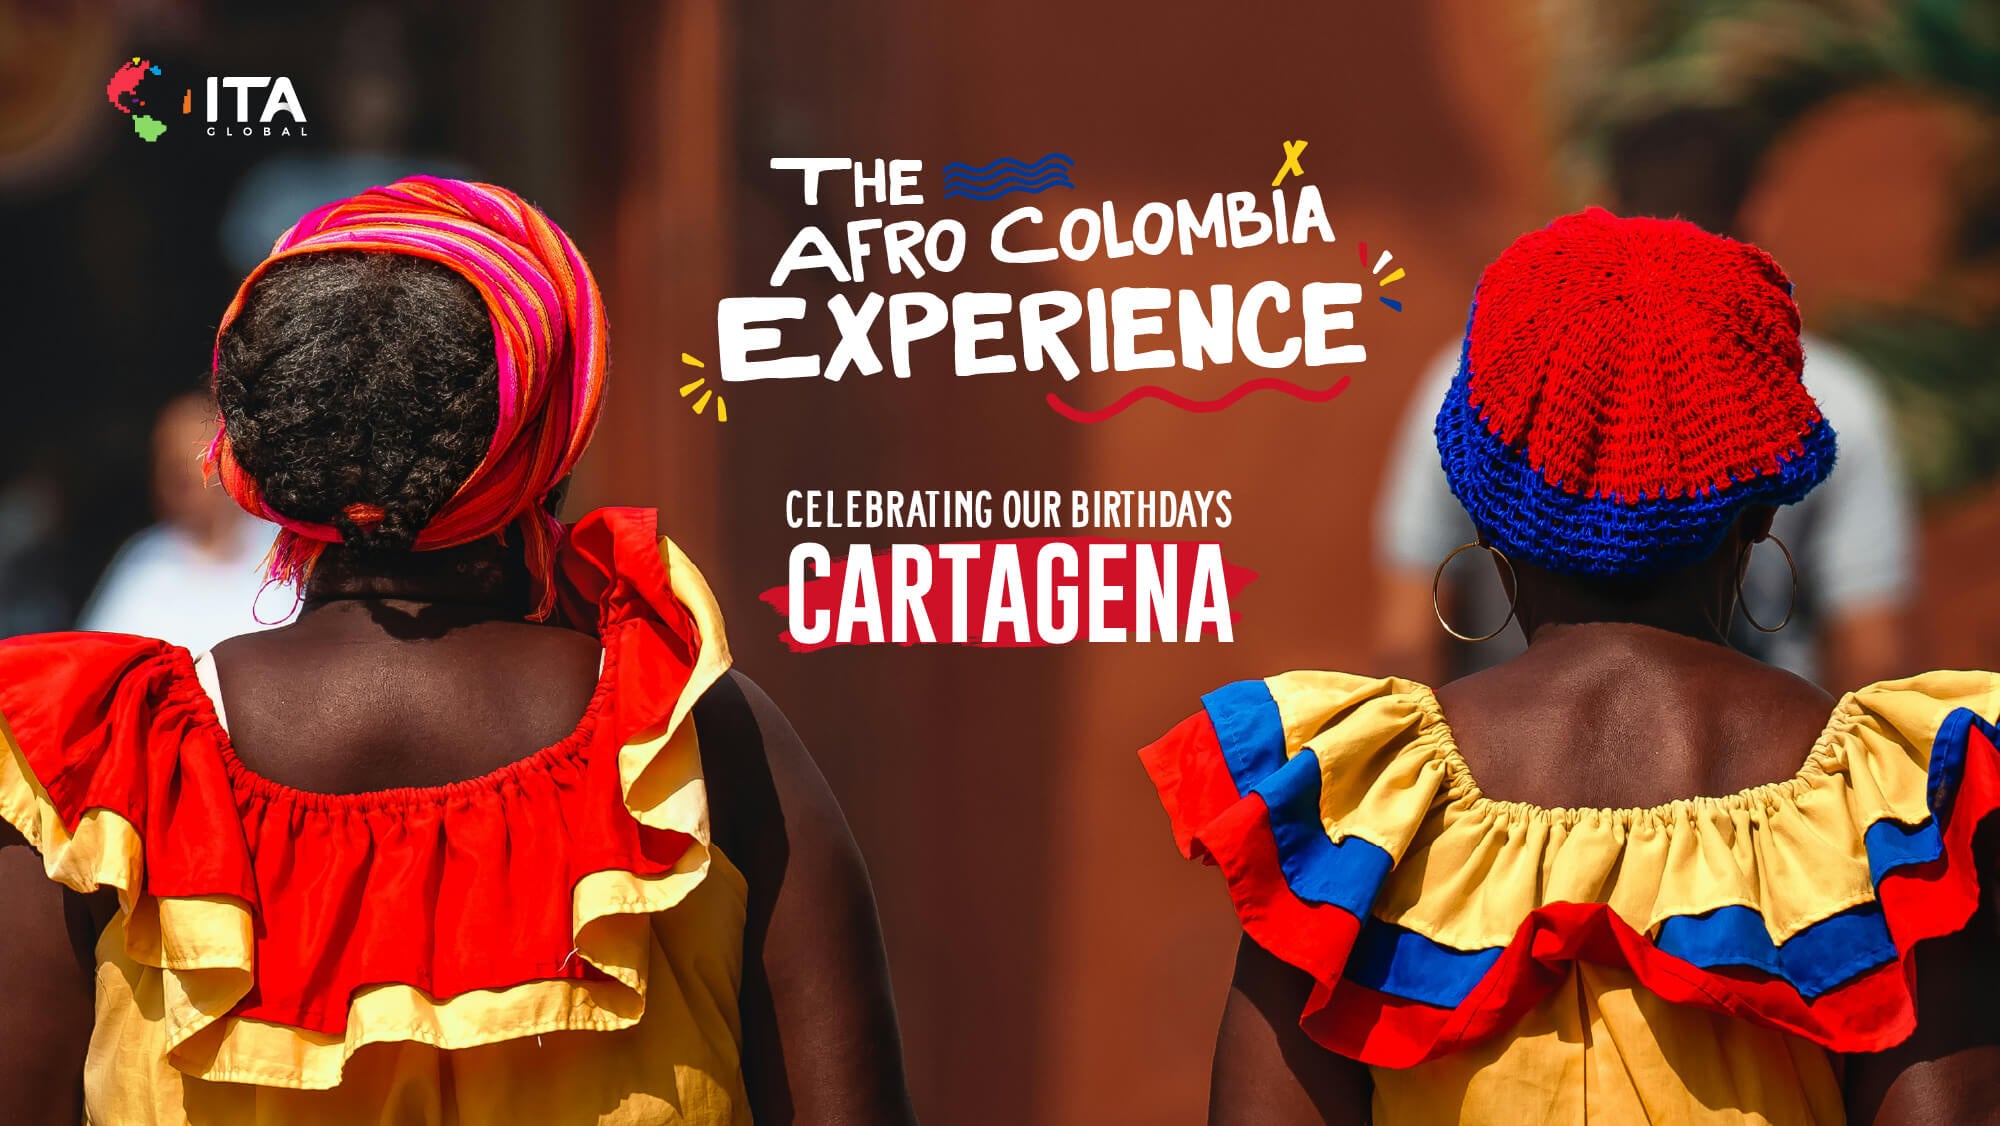 The-afro-colombia-experience_celebrating-our-birthdays-cartegana_slide1-img